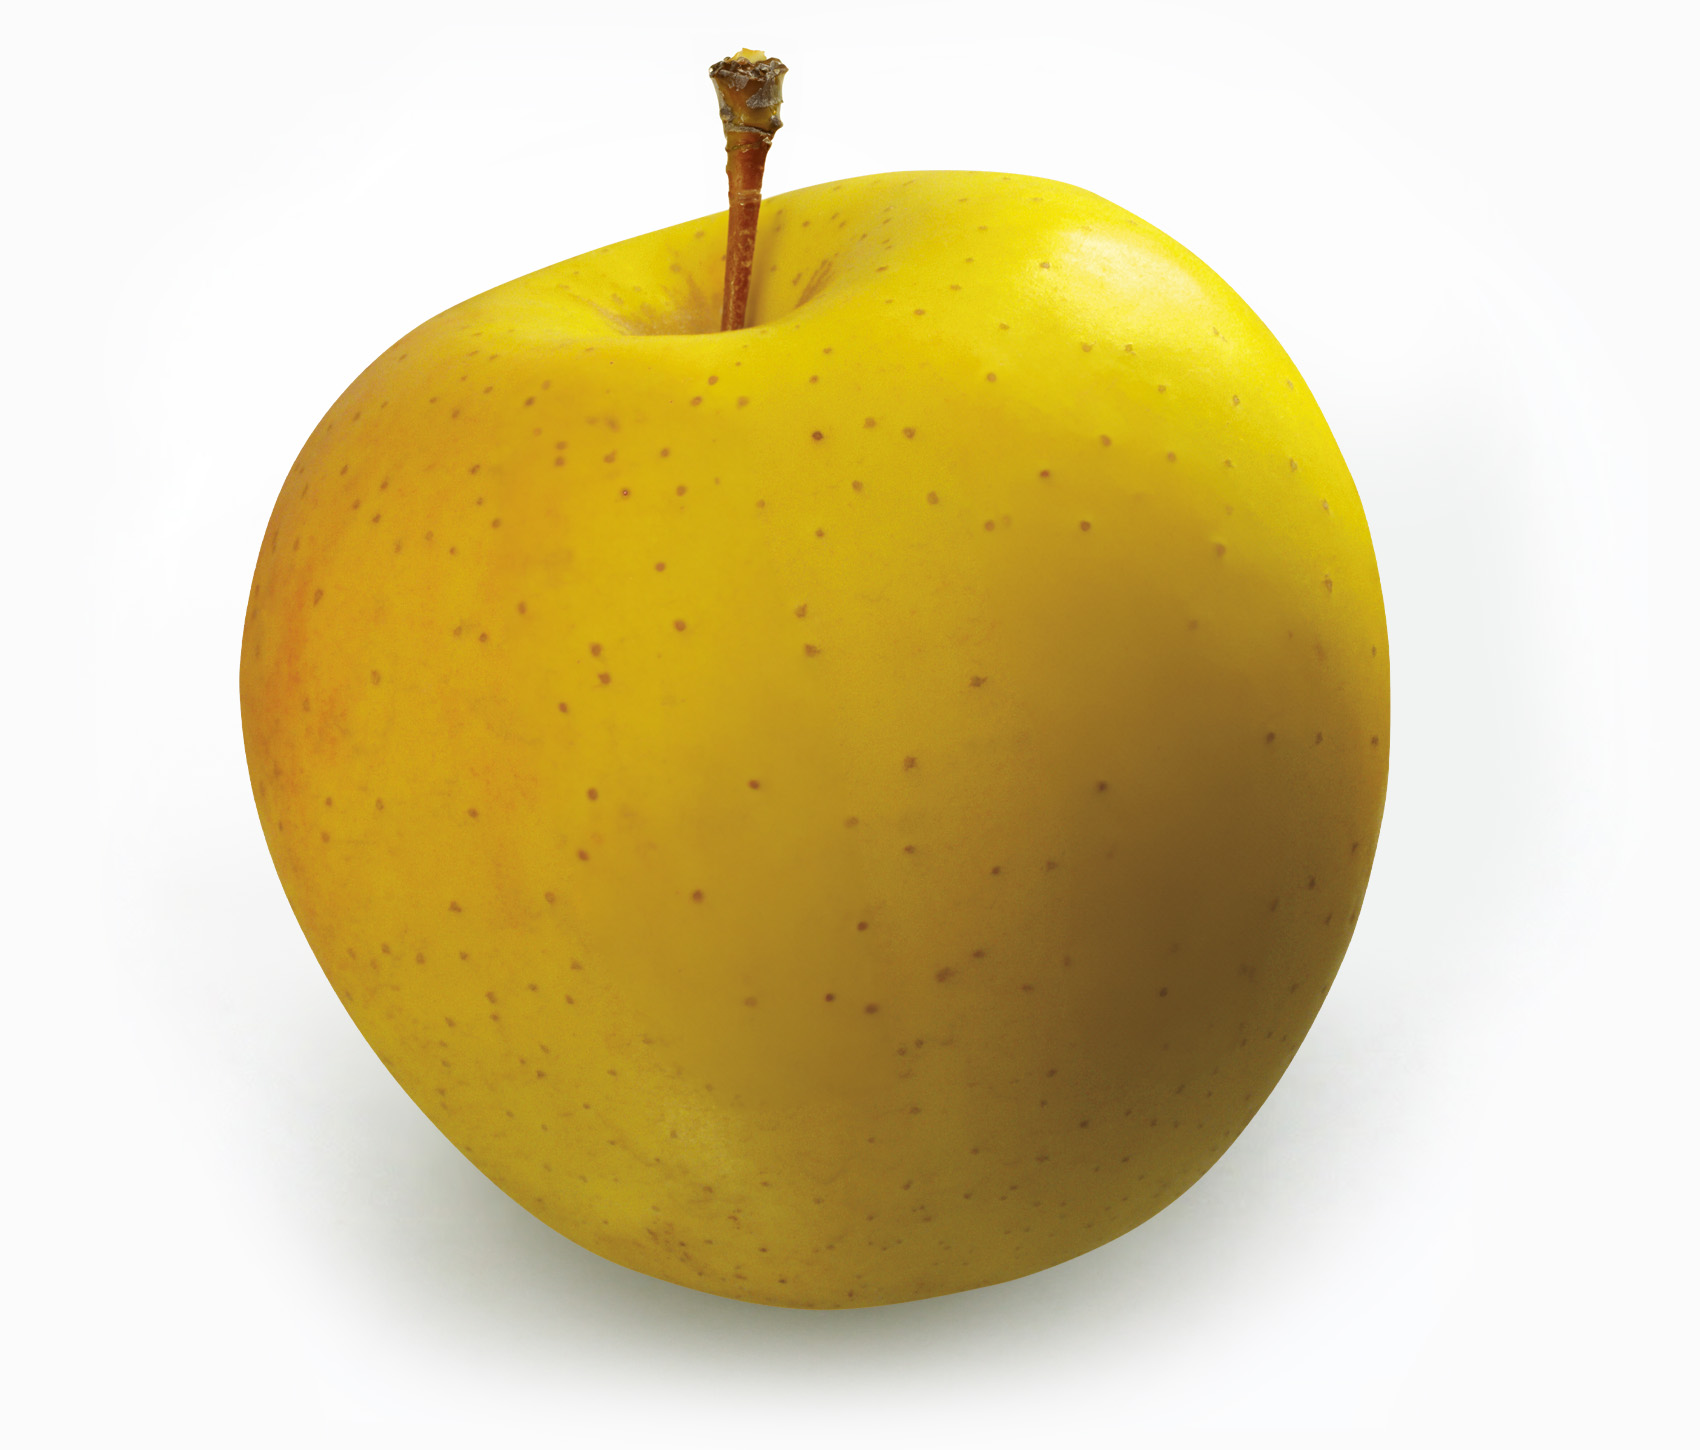 yellow apples and their uses -Yellow Transparent apples 1.1